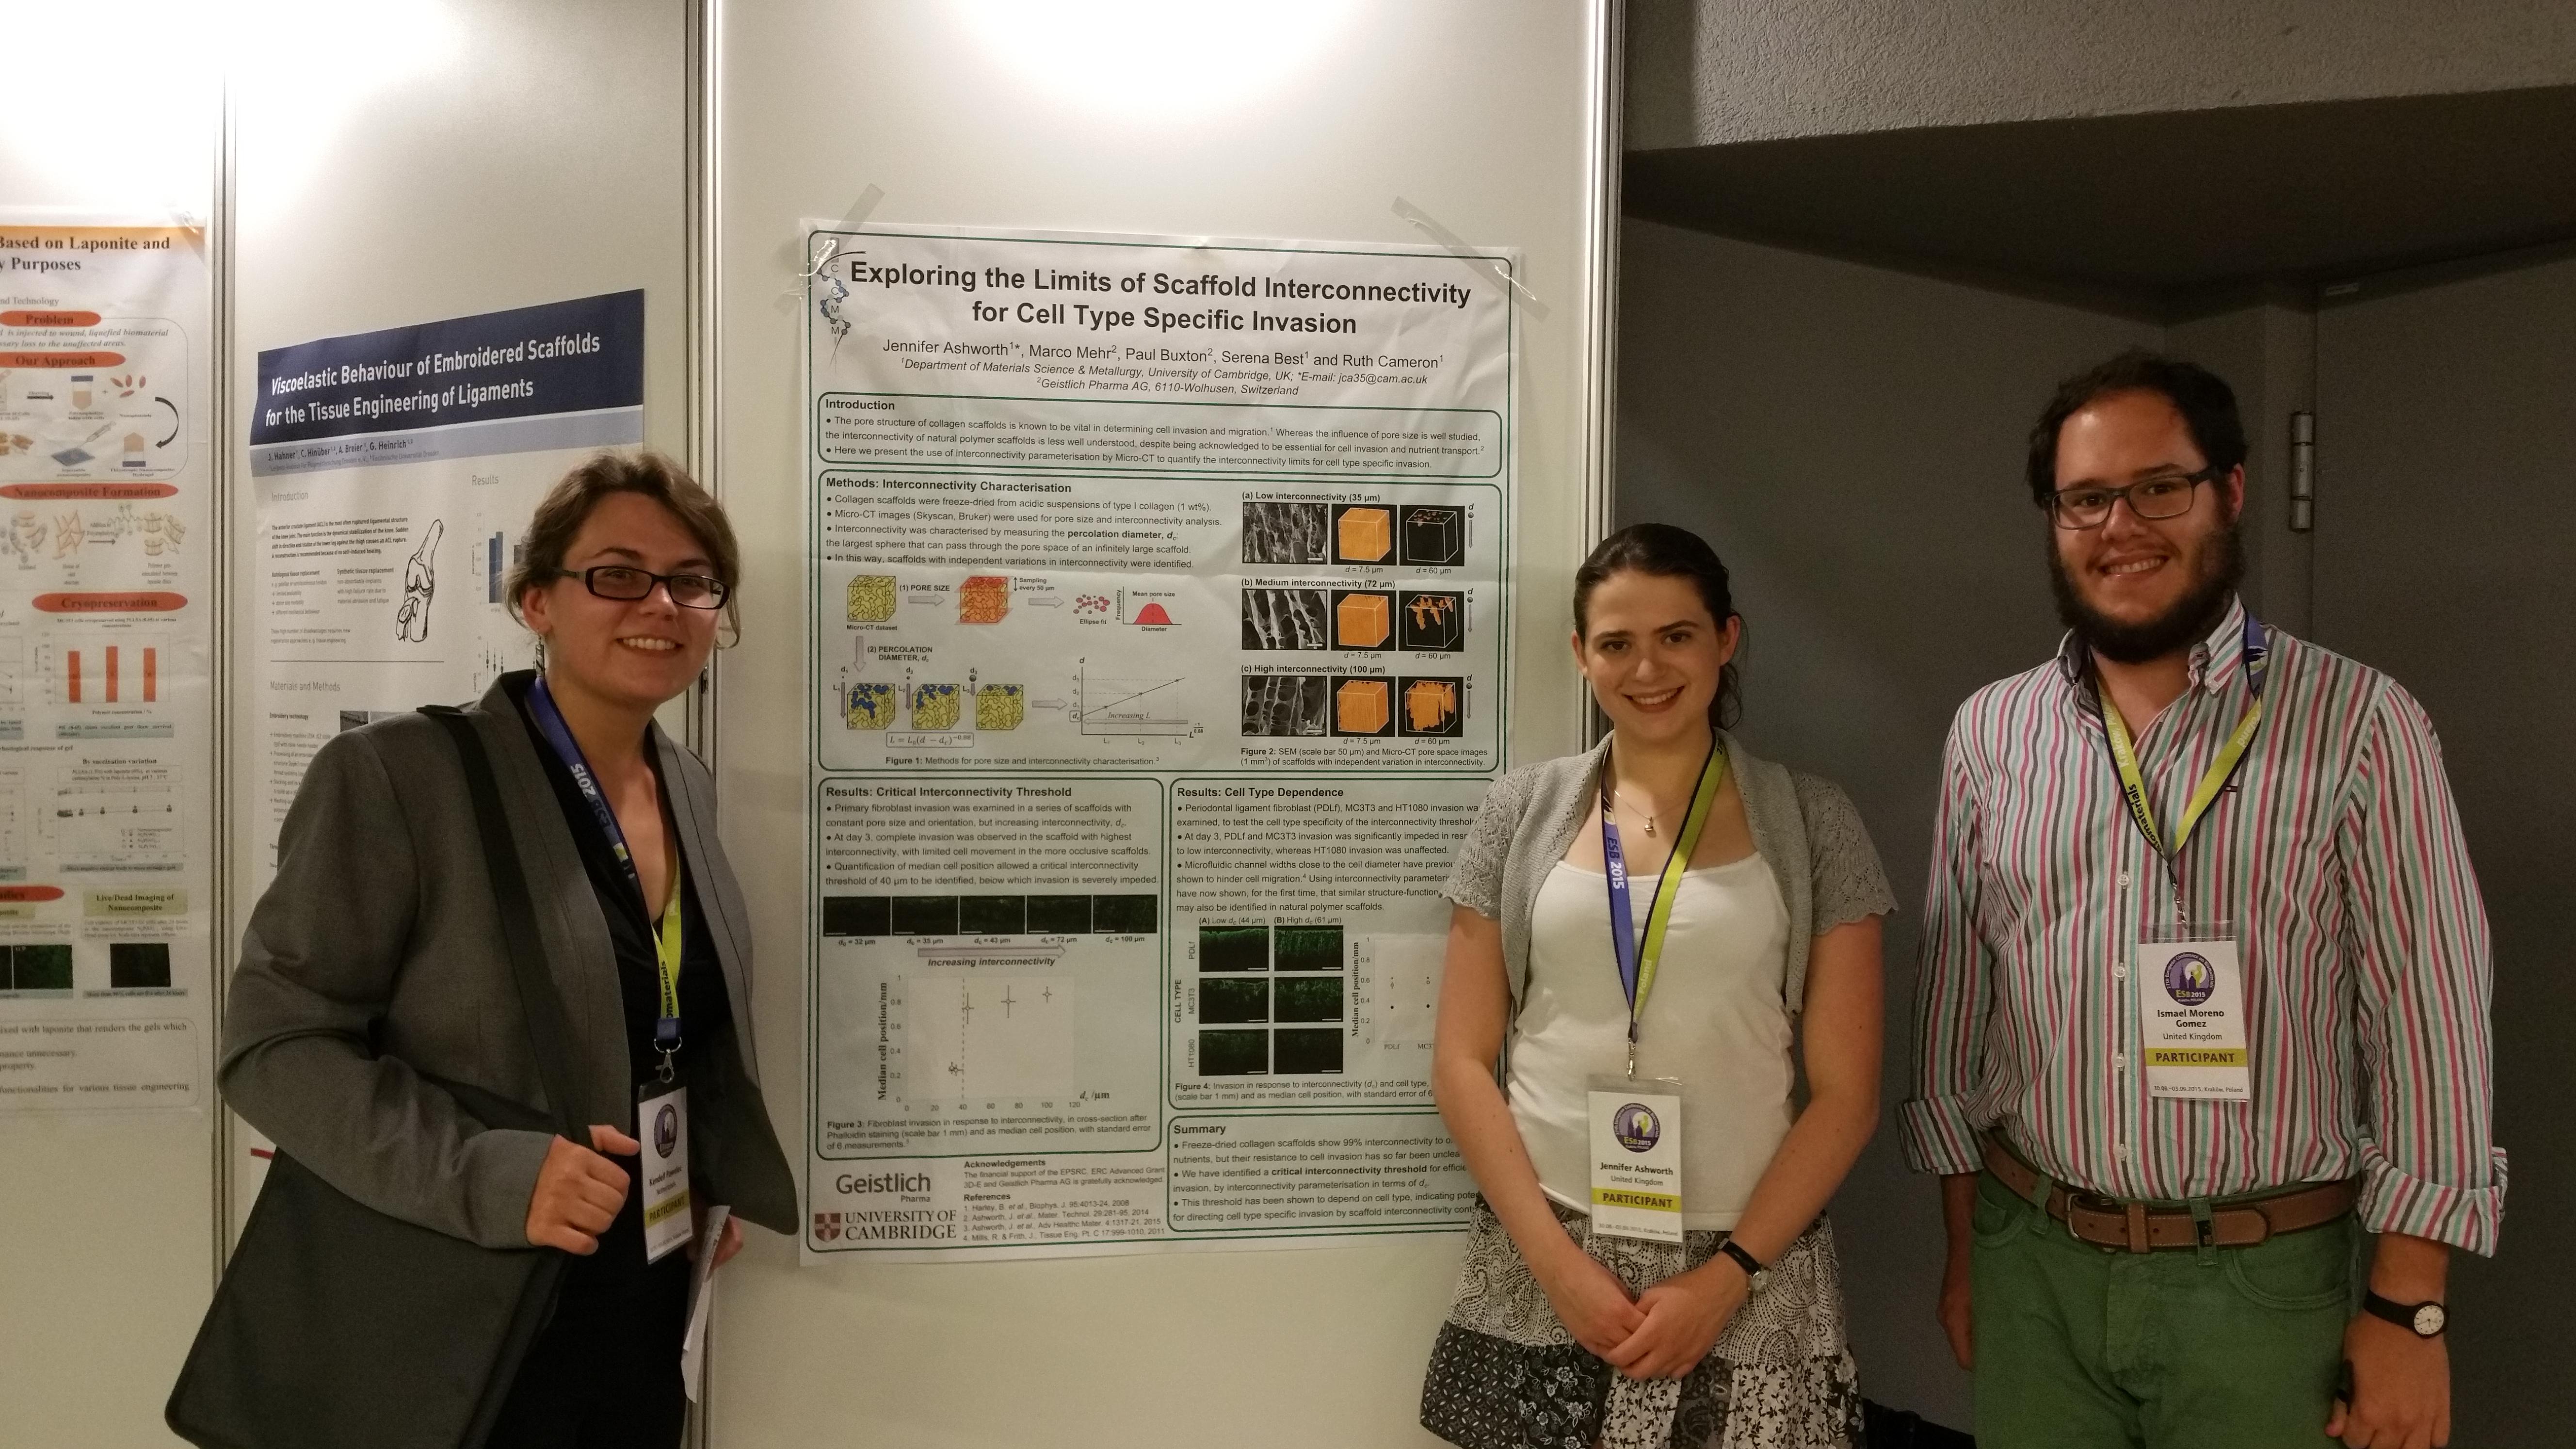 Members of CCMM attend the European Society for Biomaterials Conference in Poland